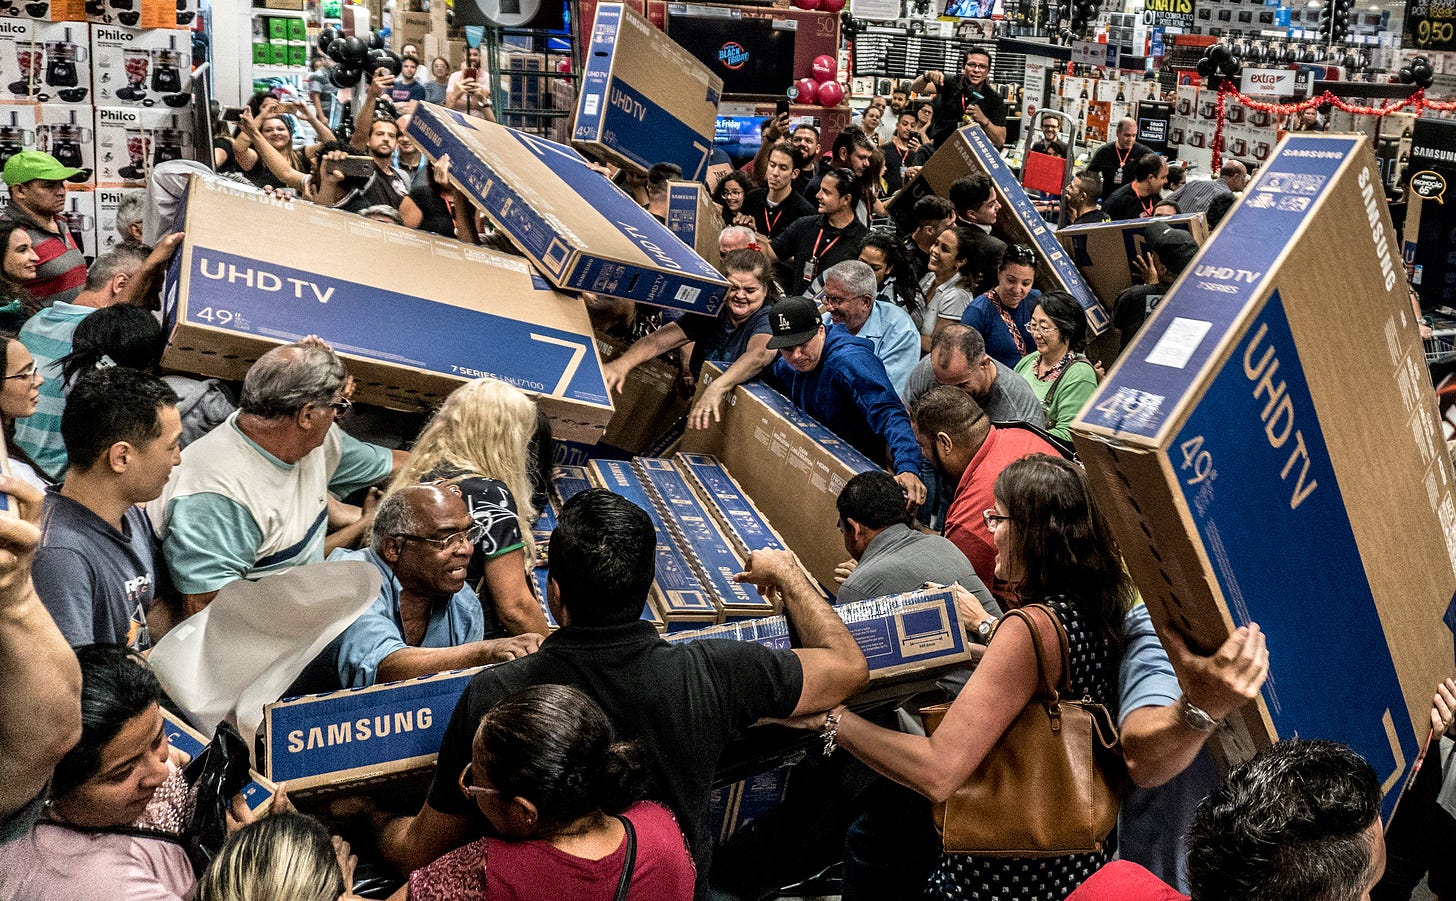 Black Friday 2019 Shapes Up To Be a Chaotic One | Fortune